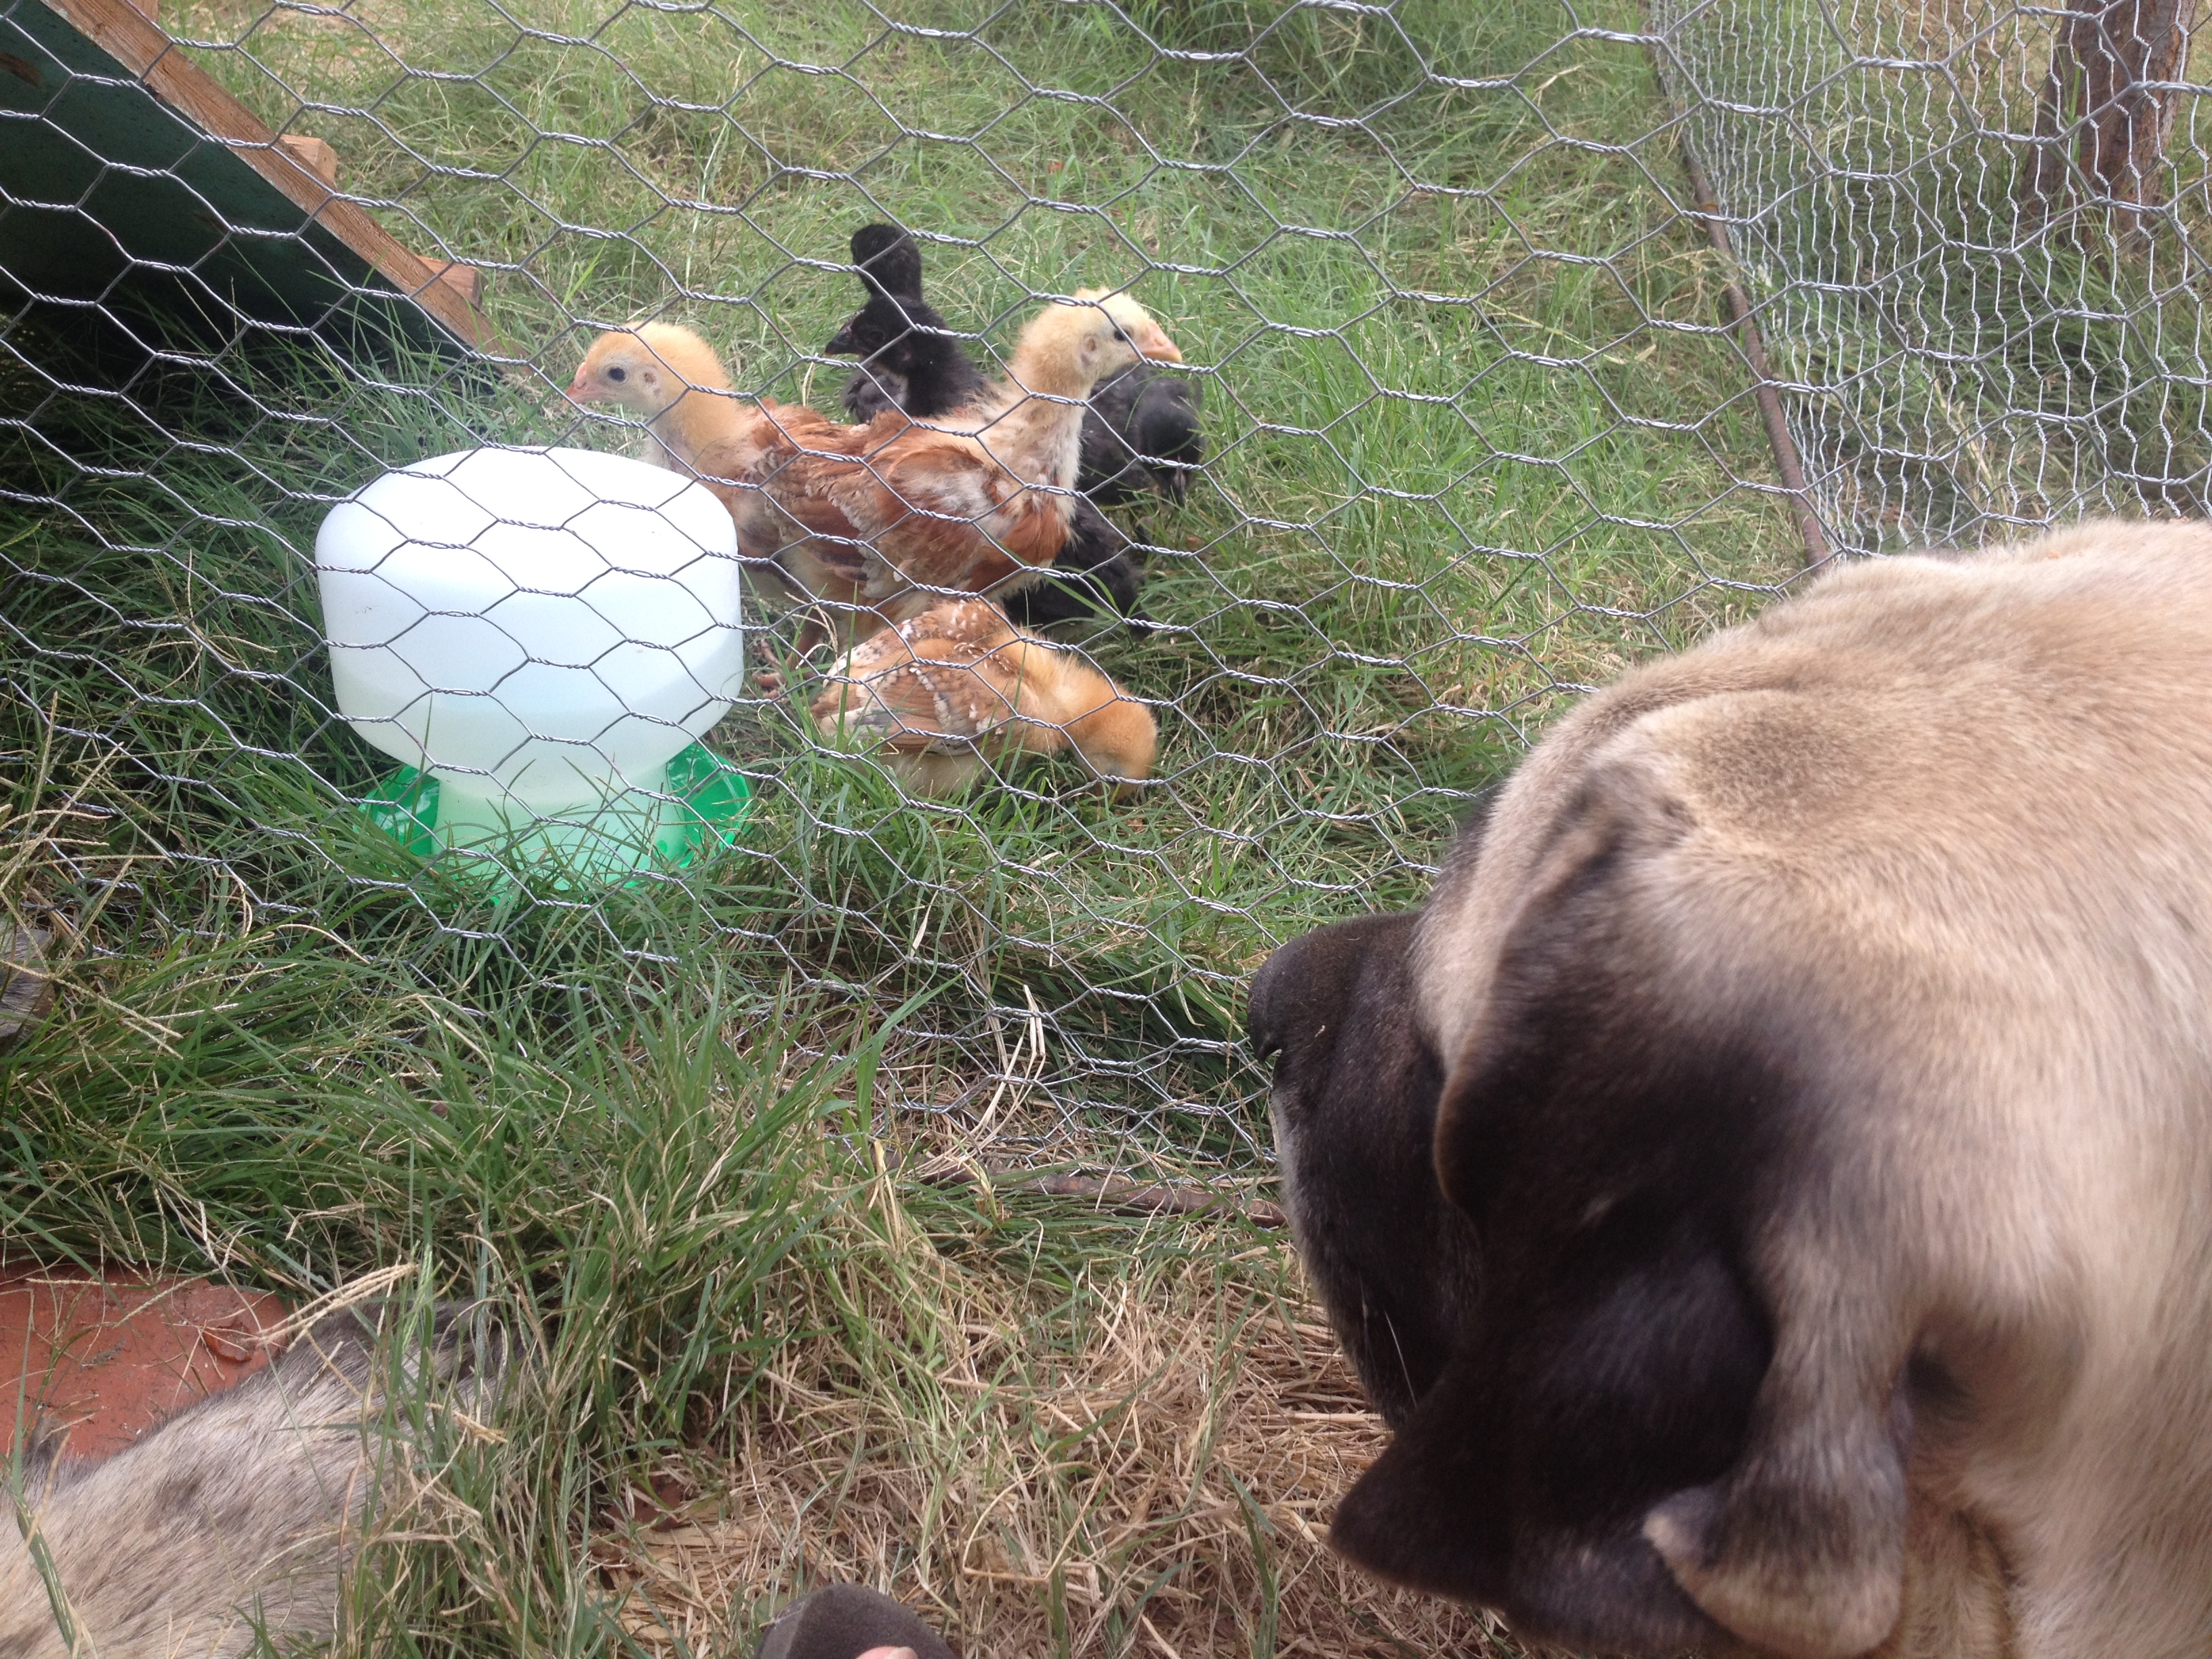 My mastiff inspecting the newcomers